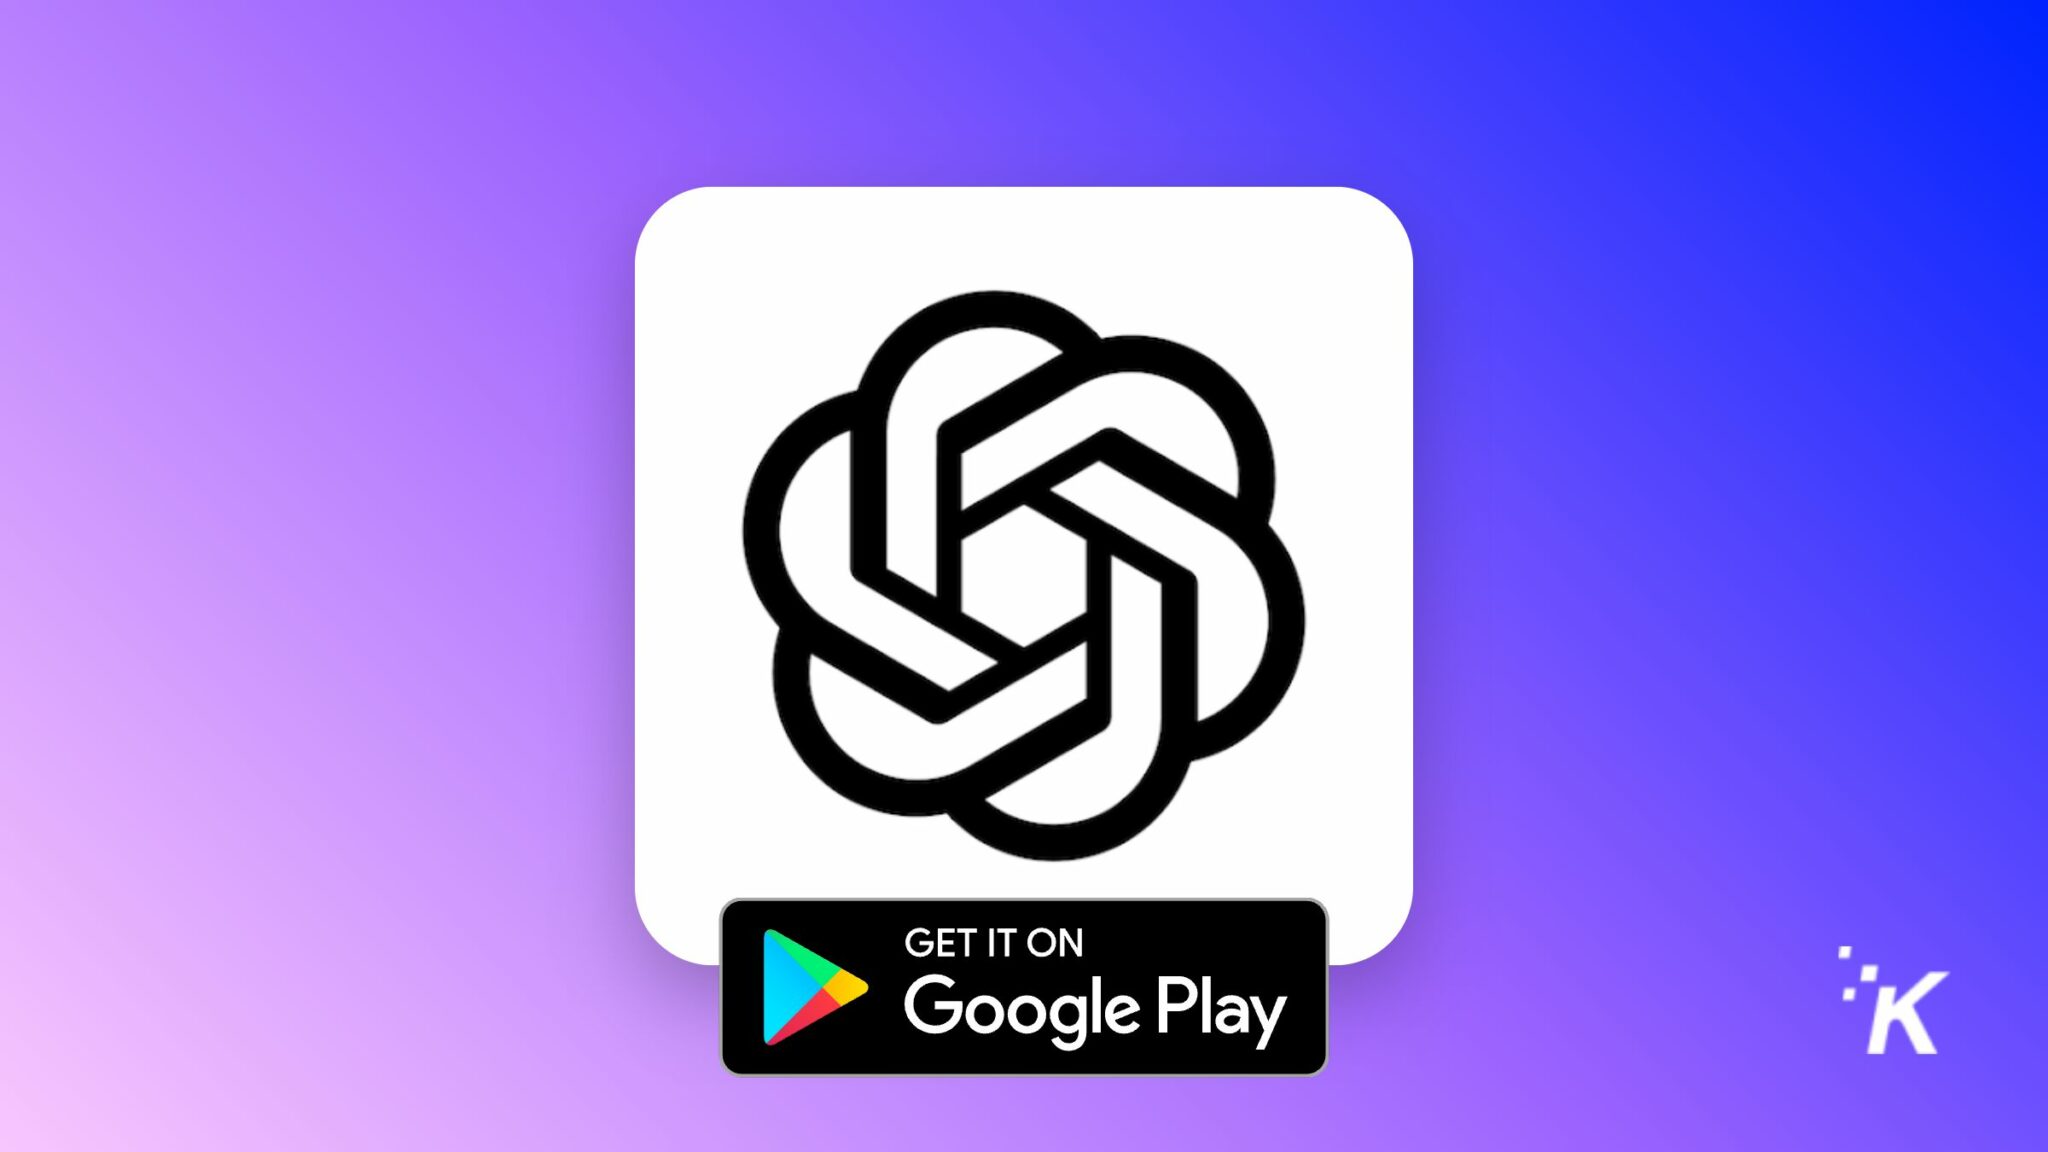 The image shows a logo for Google Play, indicating that a product or service is available for download on the platform. Full Text: GET IT ON Google Play ·K